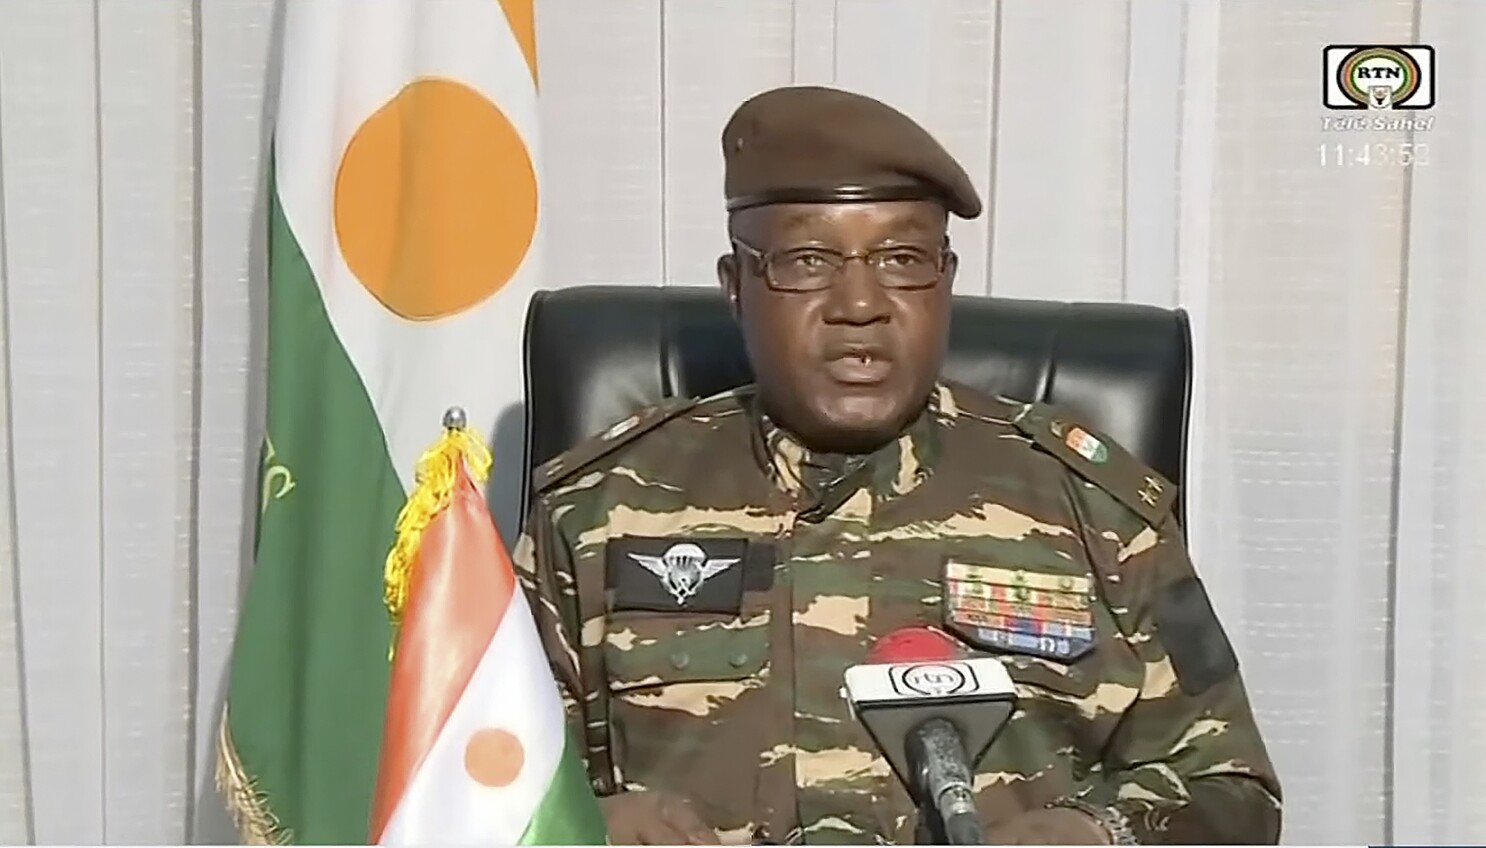 Soldiers Declare Niger General as Head of State After He Led a Coup and Detained the President